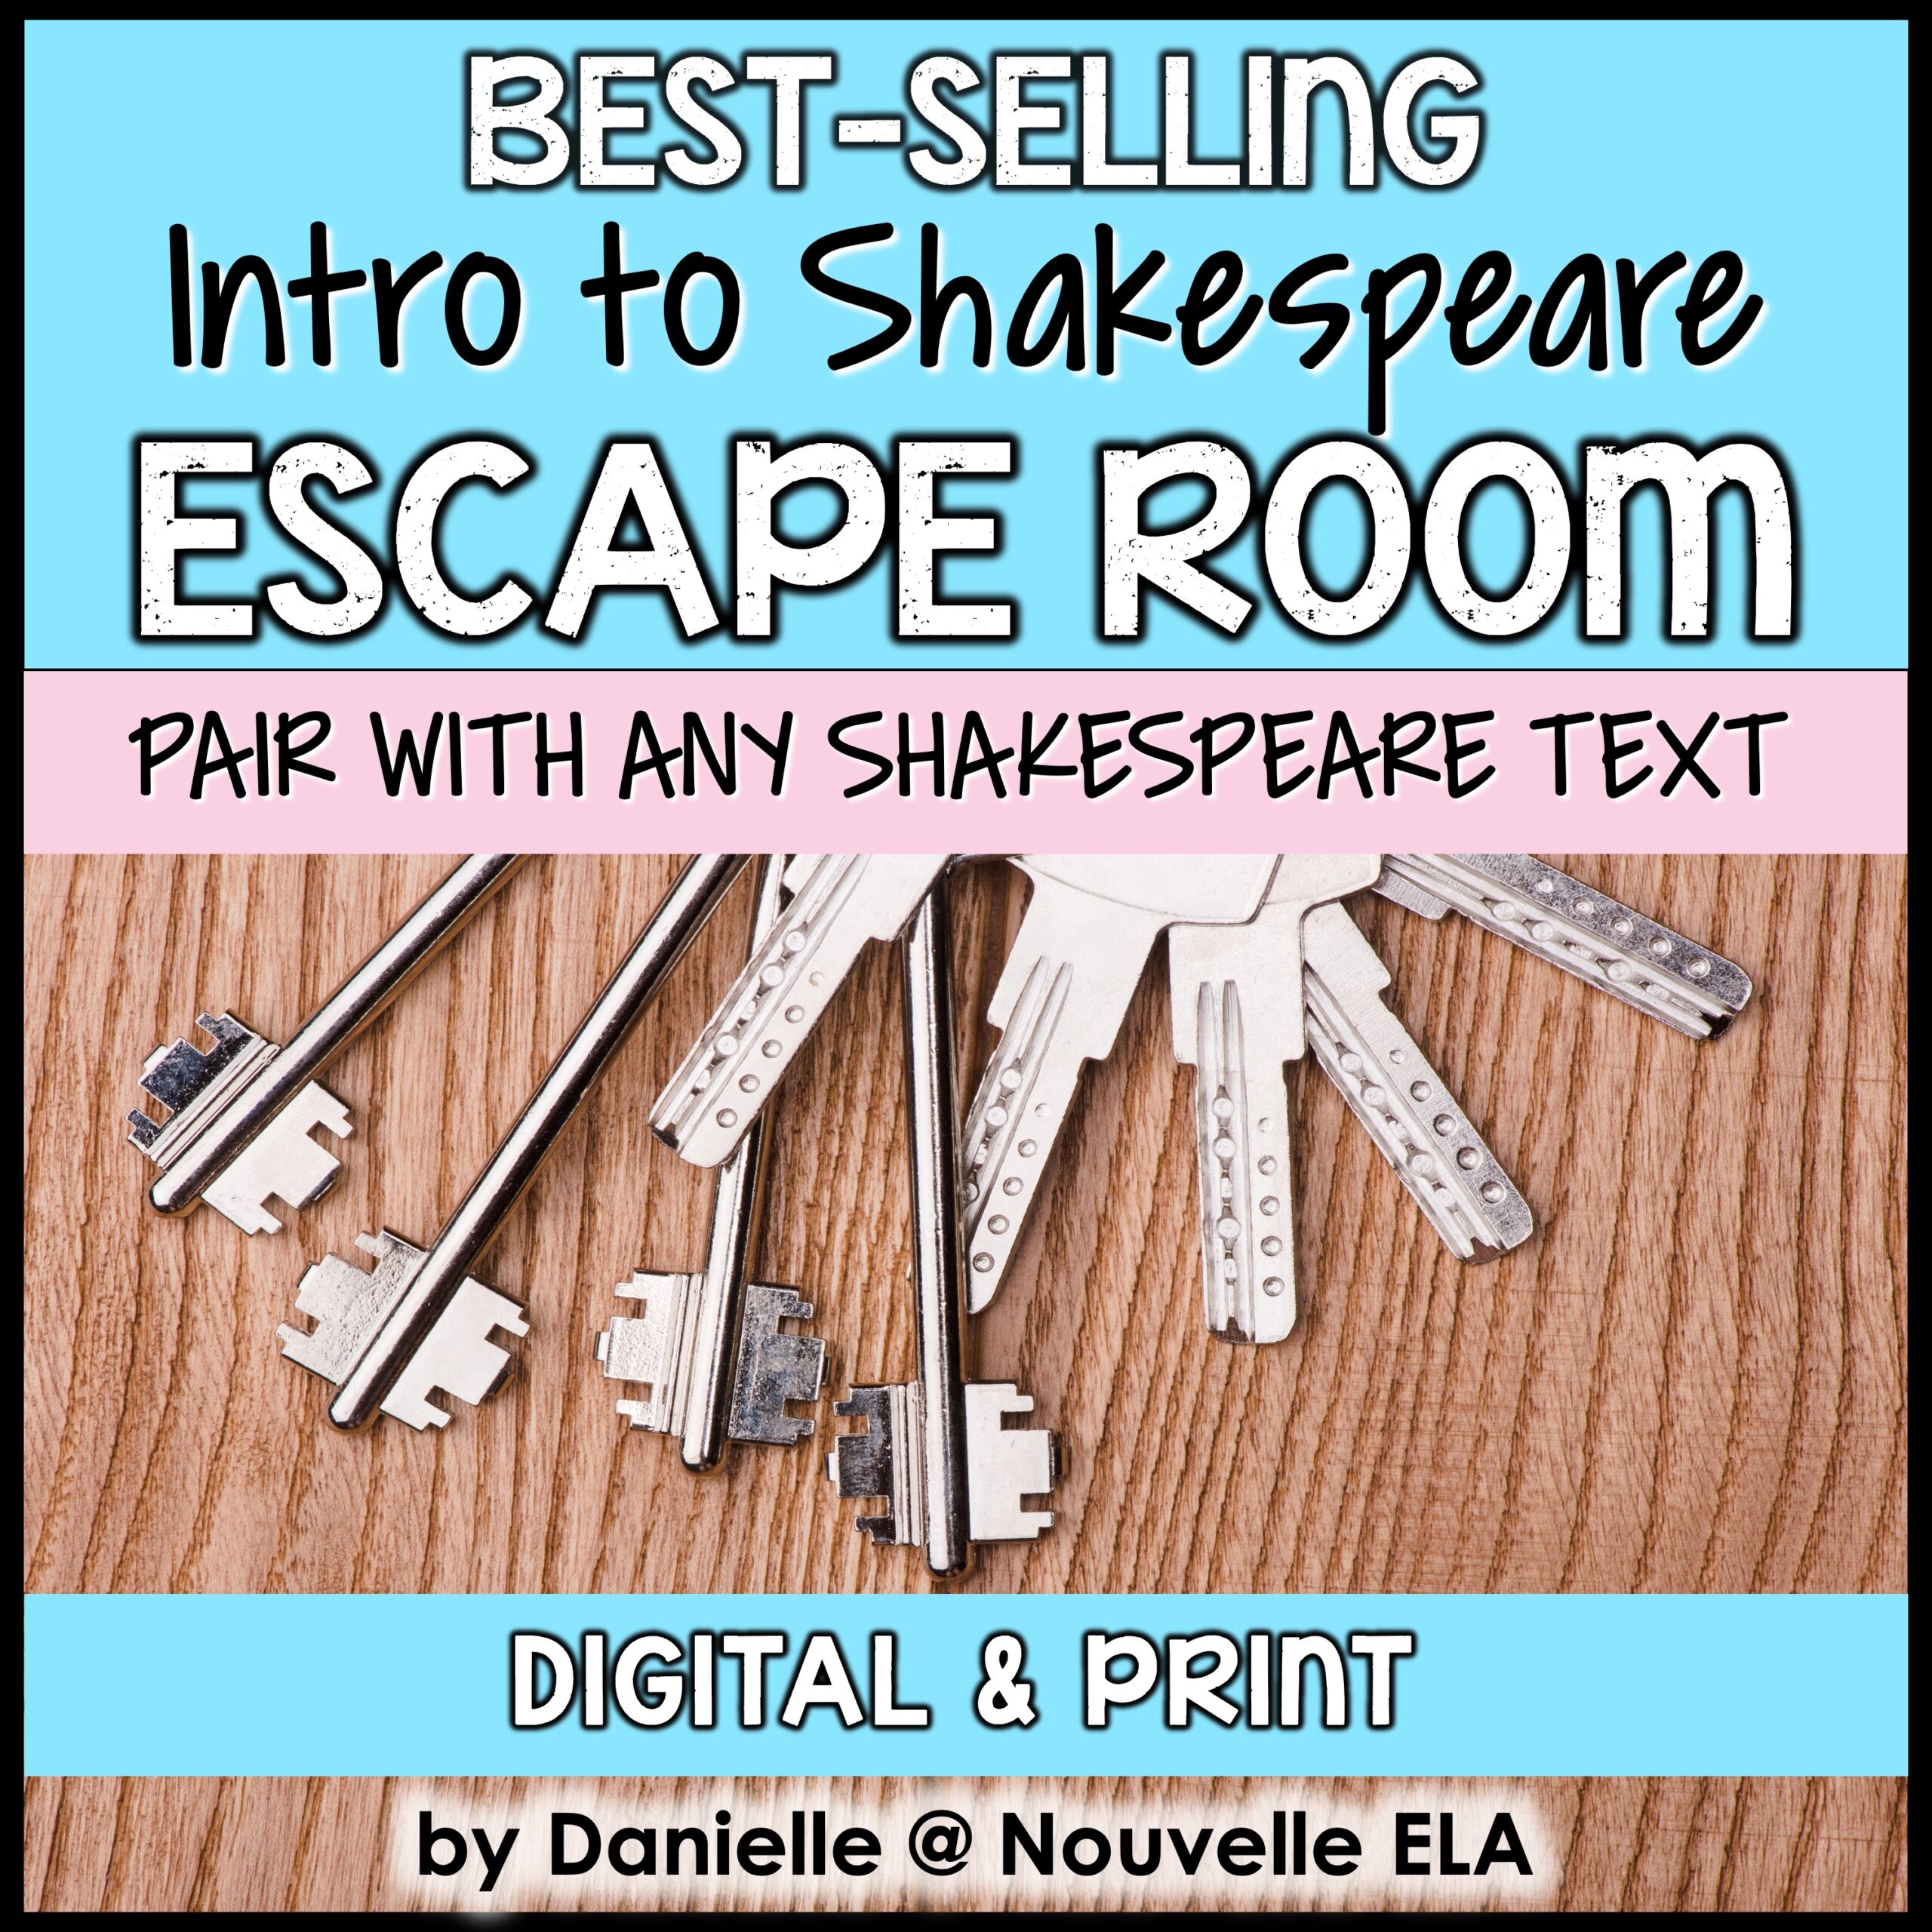 Introduction to Shakespeare escape room that pairs with any shakespeare text available in digital & print